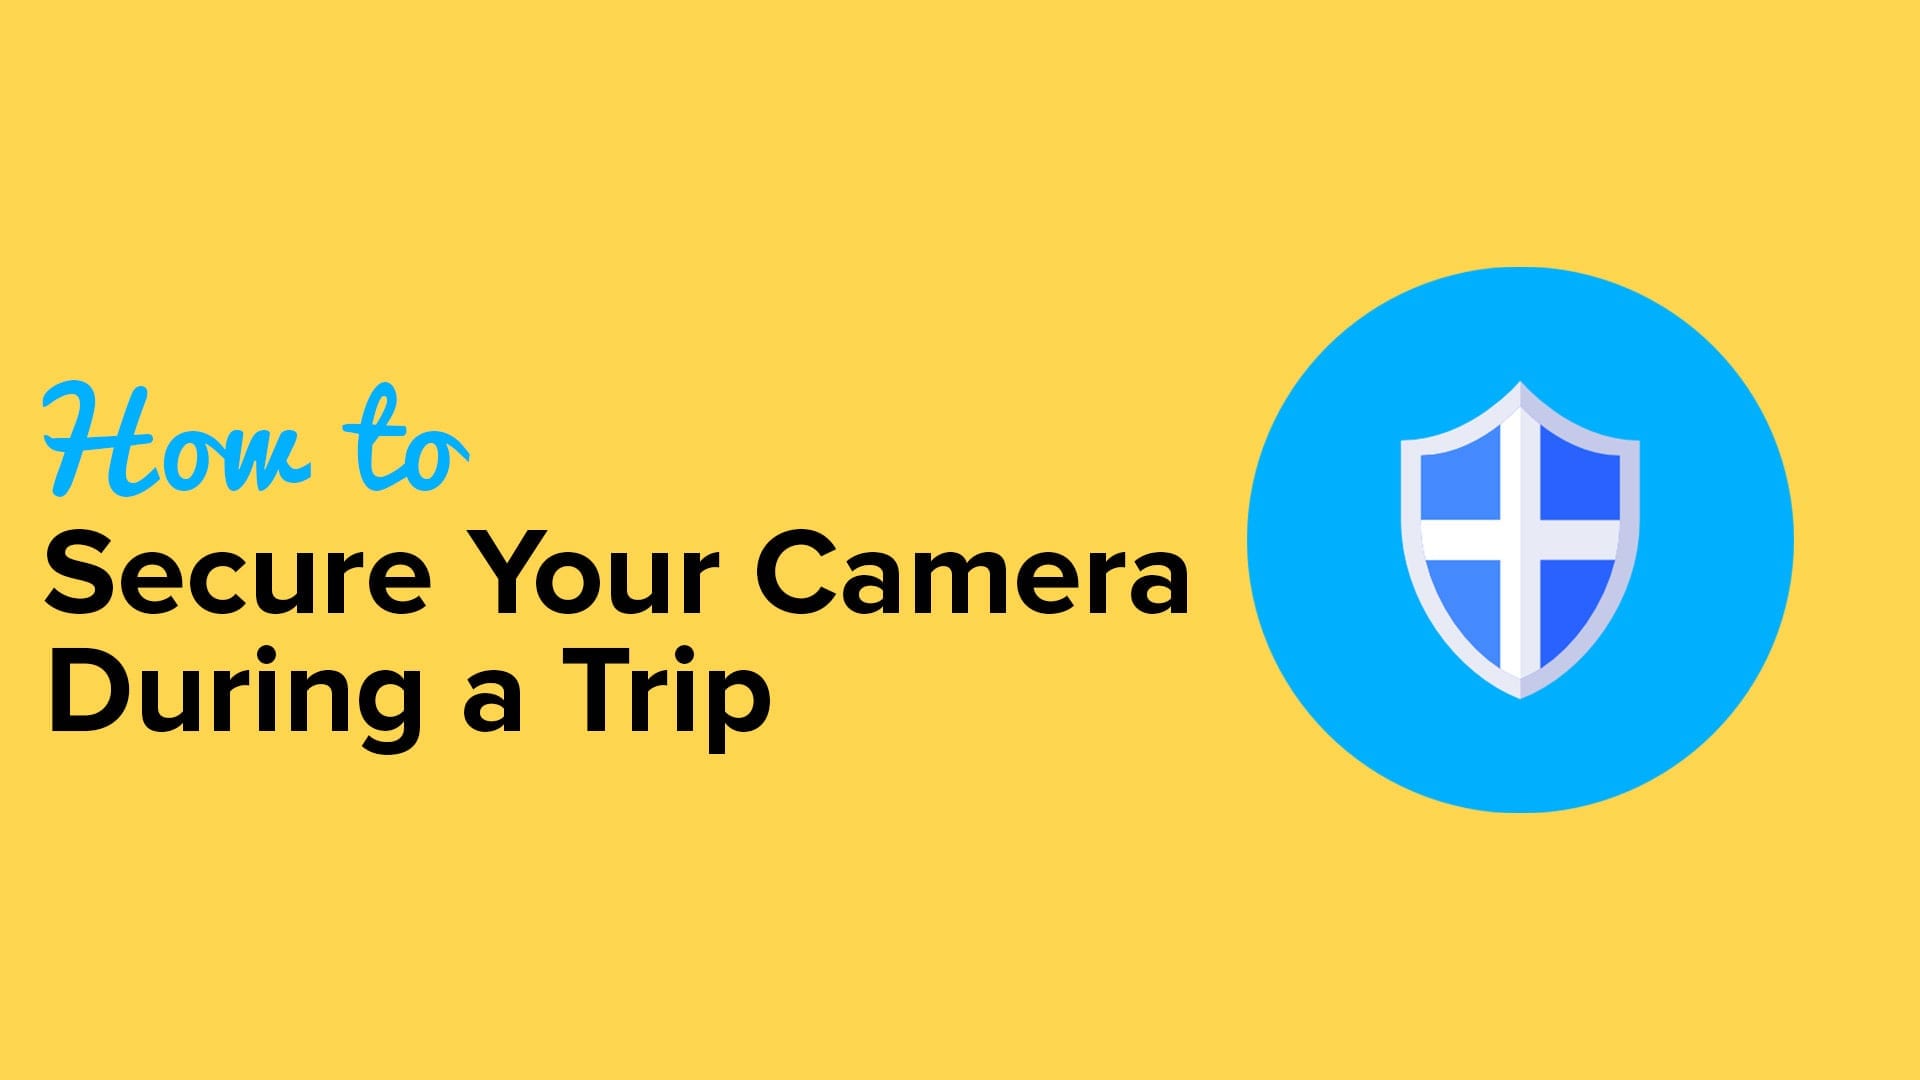 How to Secure Your Camera During a Trip